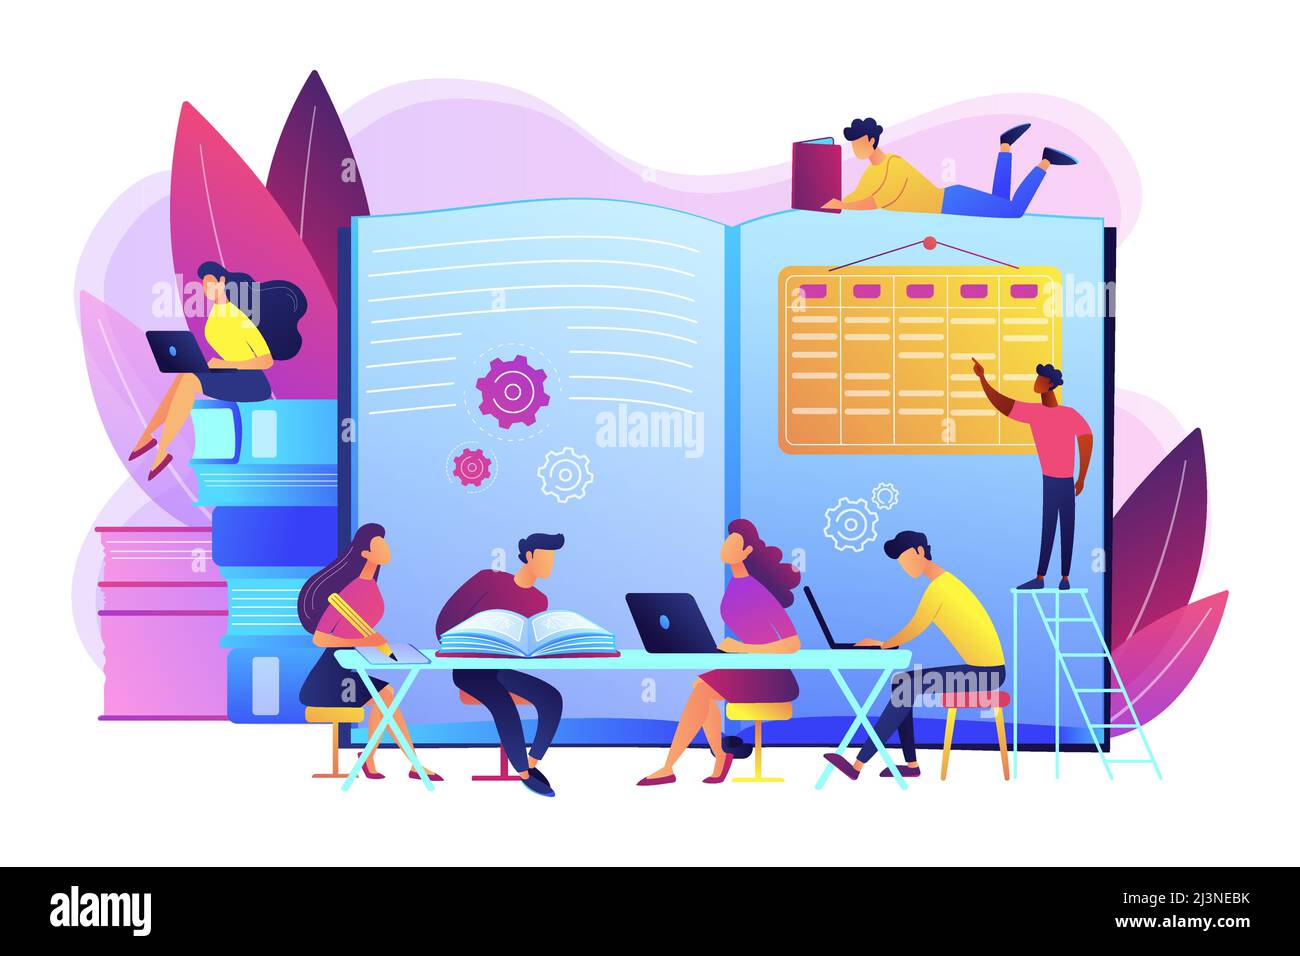 Preparing test together. Learning and studying with friends. Effective revision, revision timetables and planning, how to revise for exams concept. Br Stock Vector